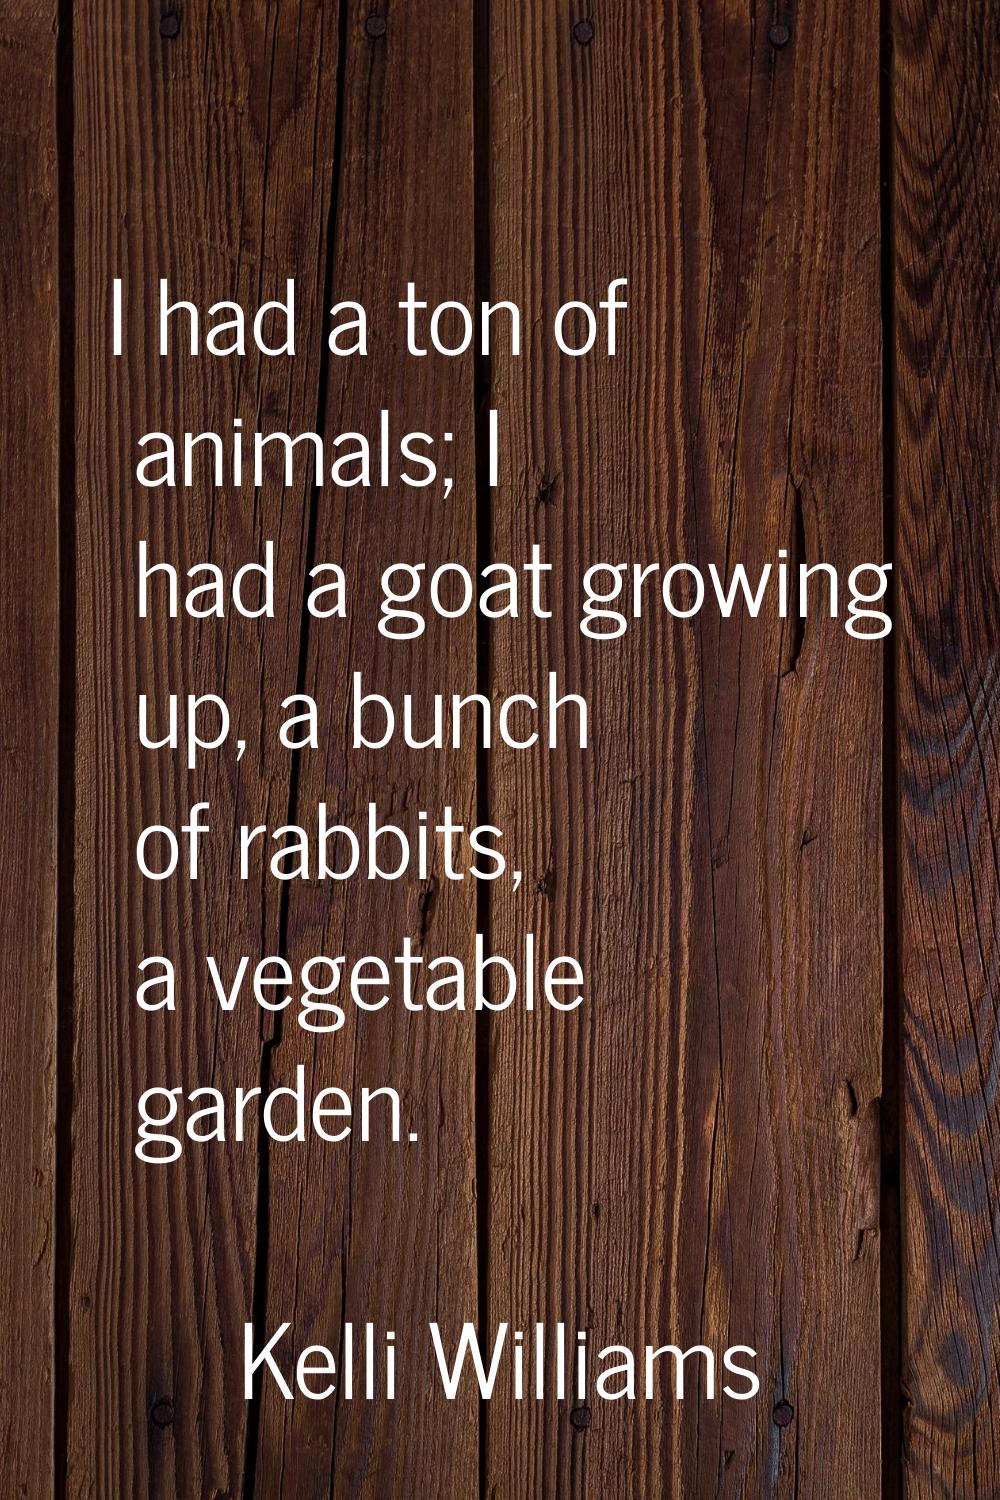 I had a ton of animals; I had a goat growing up, a bunch of rabbits, a vegetable garden.